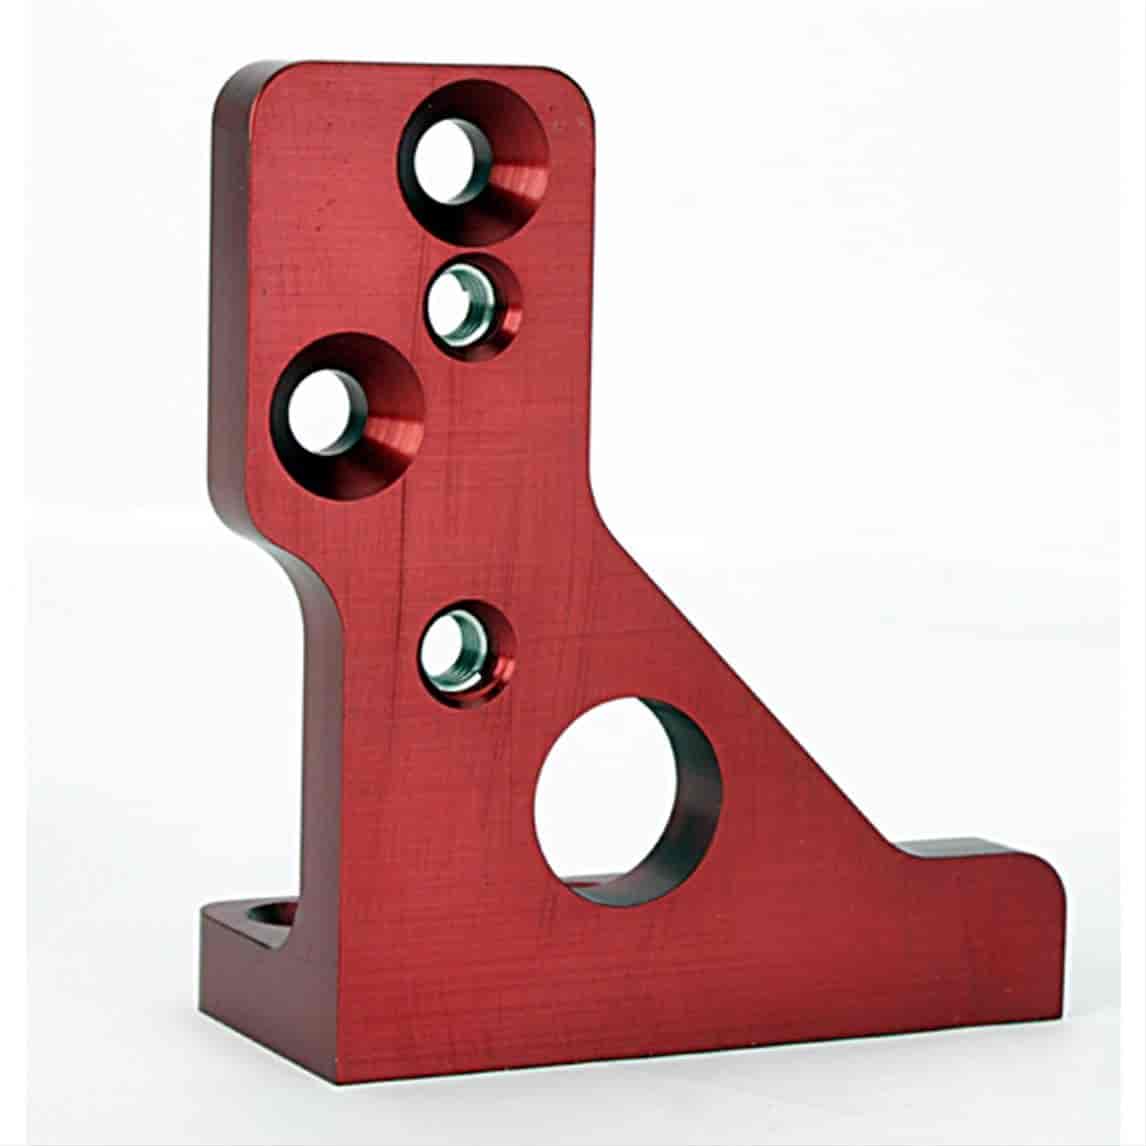 TOP PUMP MOUNT STAND - WULF